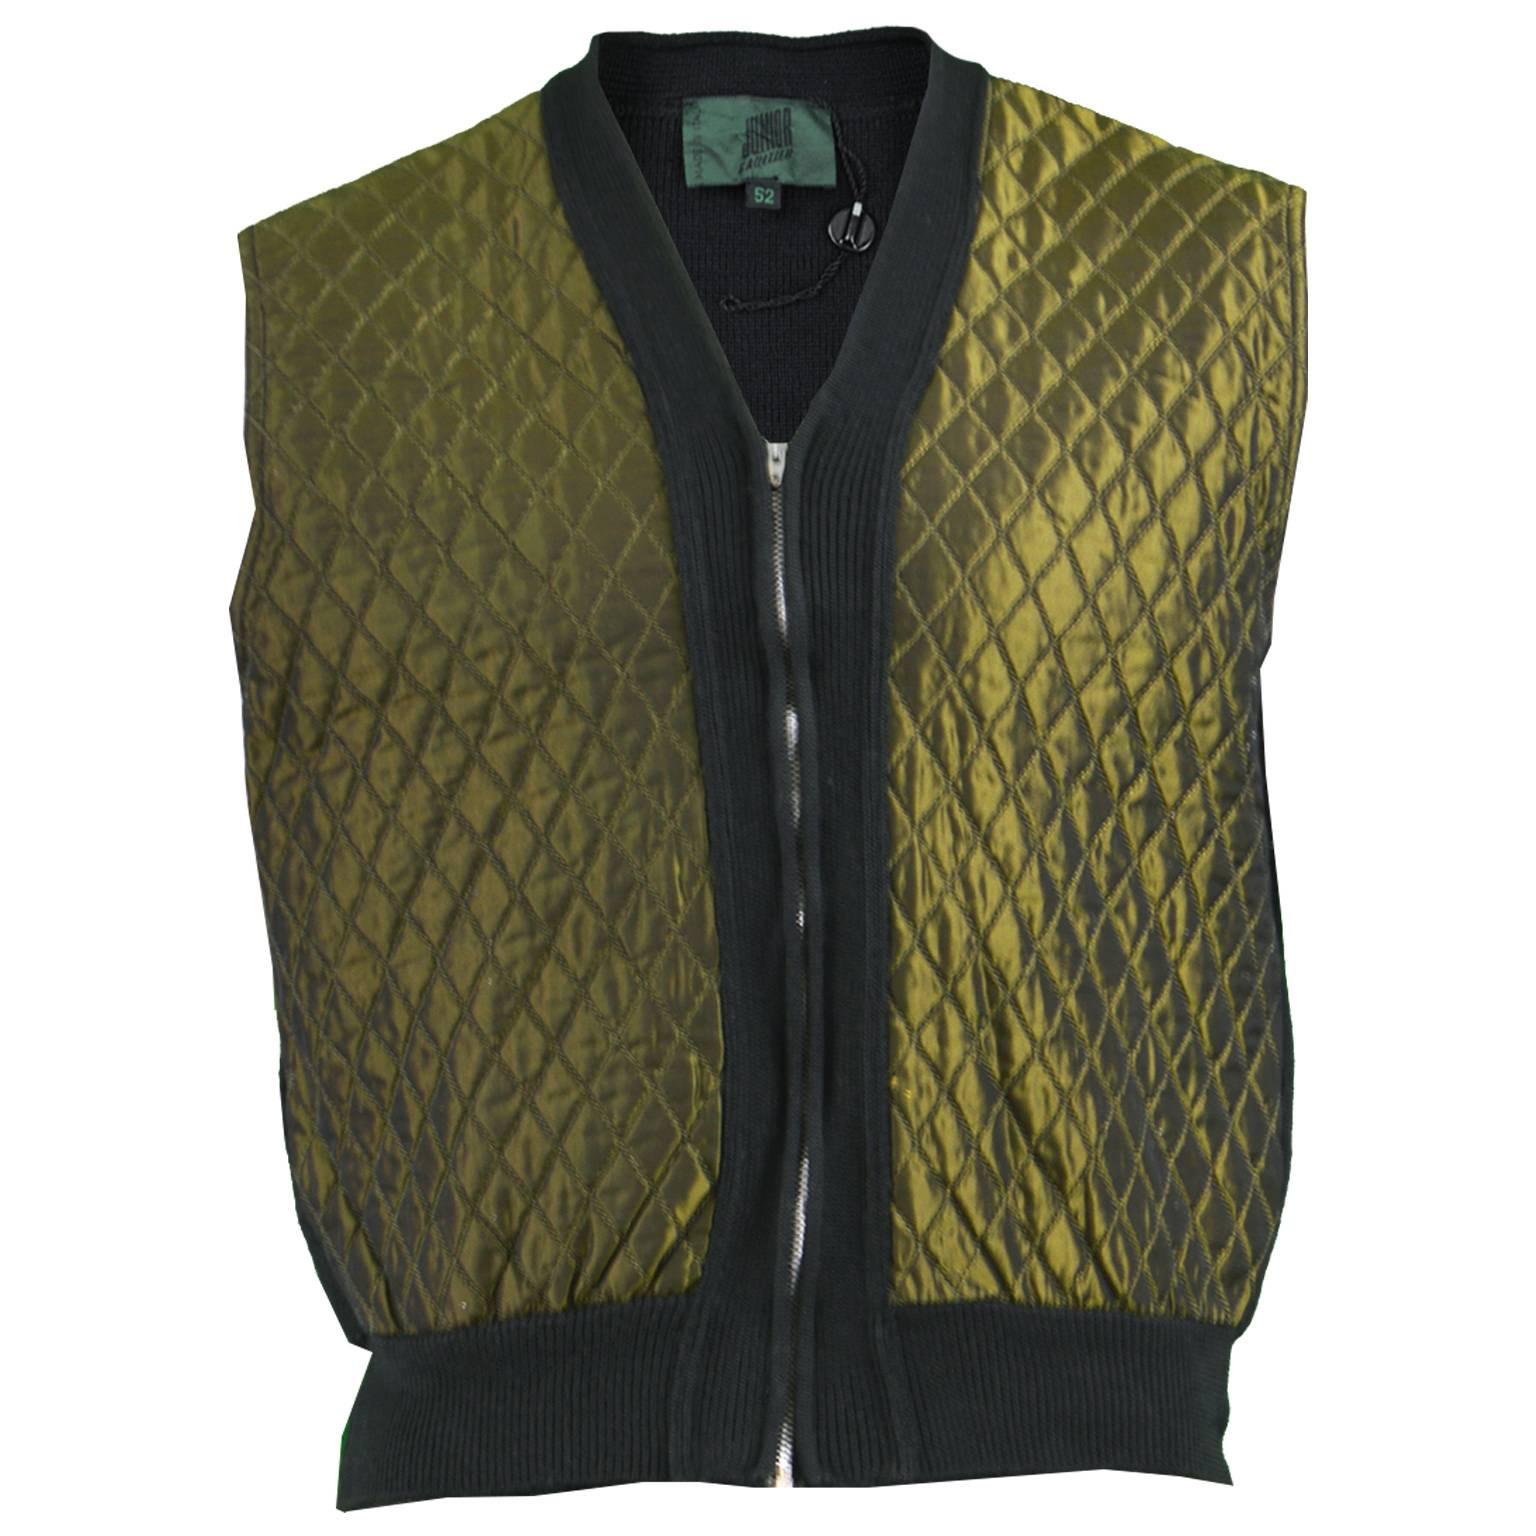 Jean Paul Gaultier Vintage Men's Gold Quilted Sleeveless Jacket, 1980s